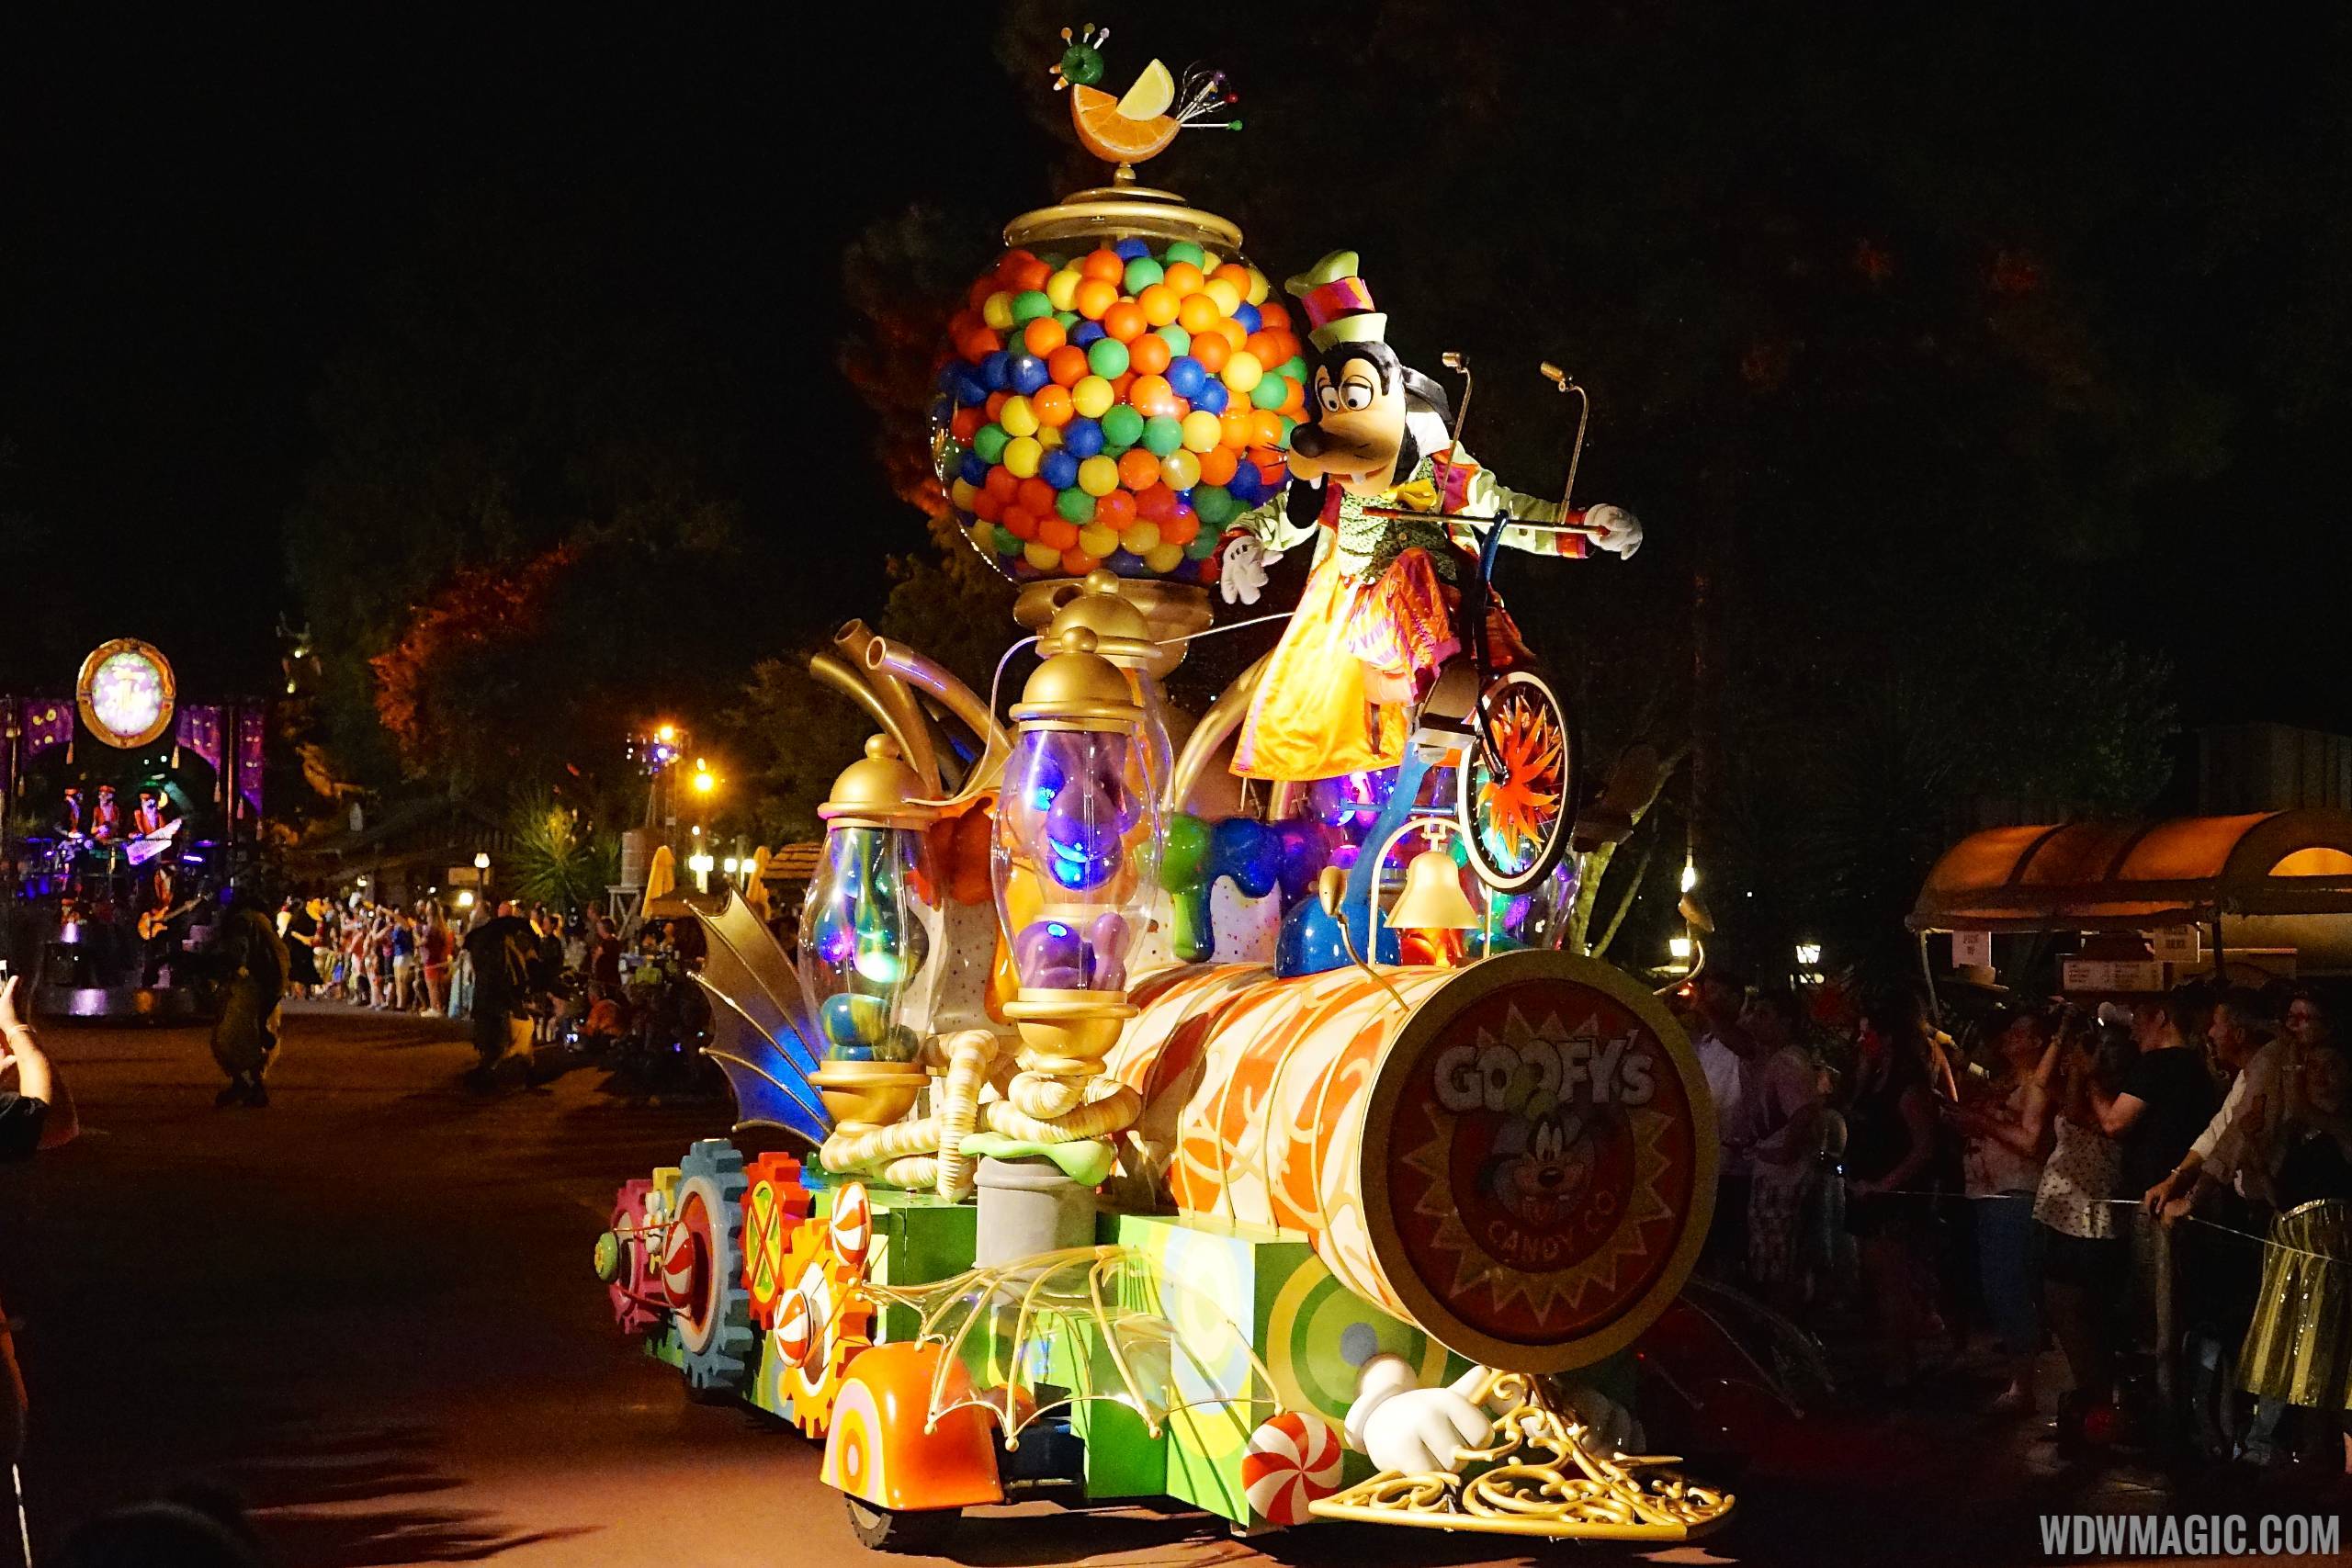 Boo To You Parade - Goofy's Candy float